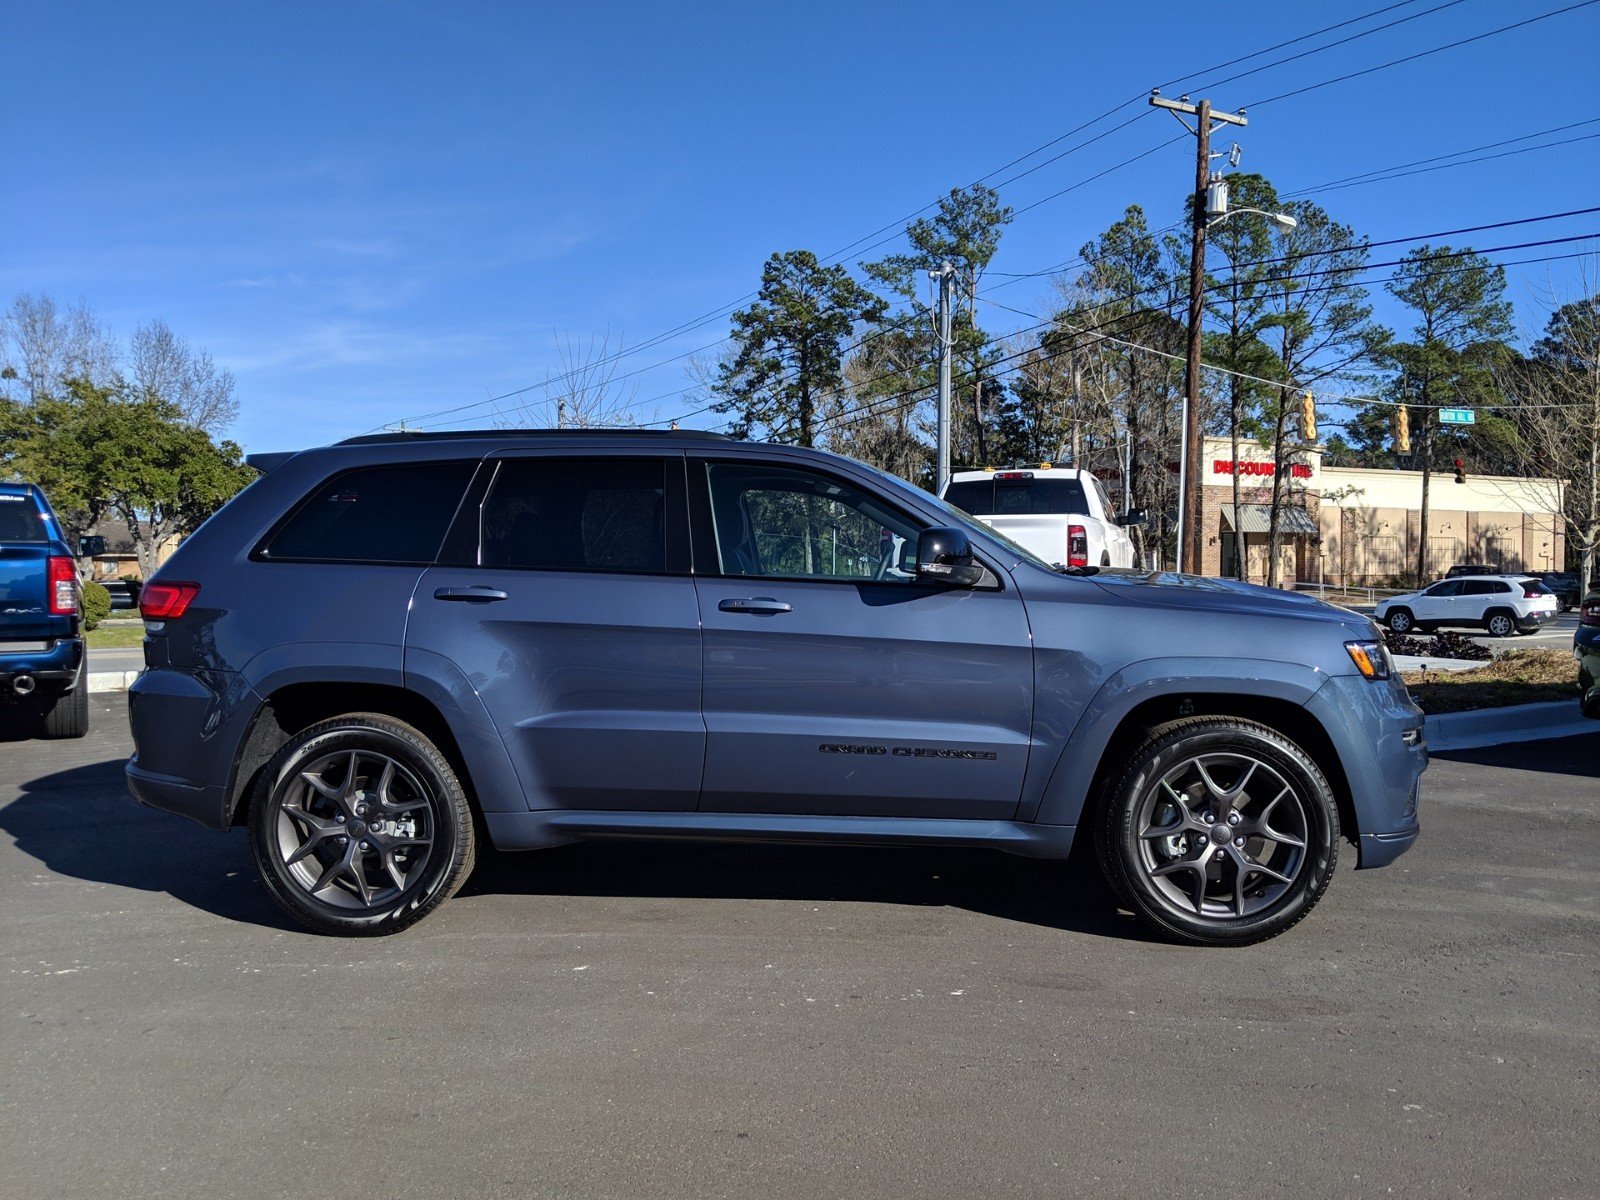 New 2020 Jeep Grand Cherokee Limited X 4d Sport Utility In Beaufort